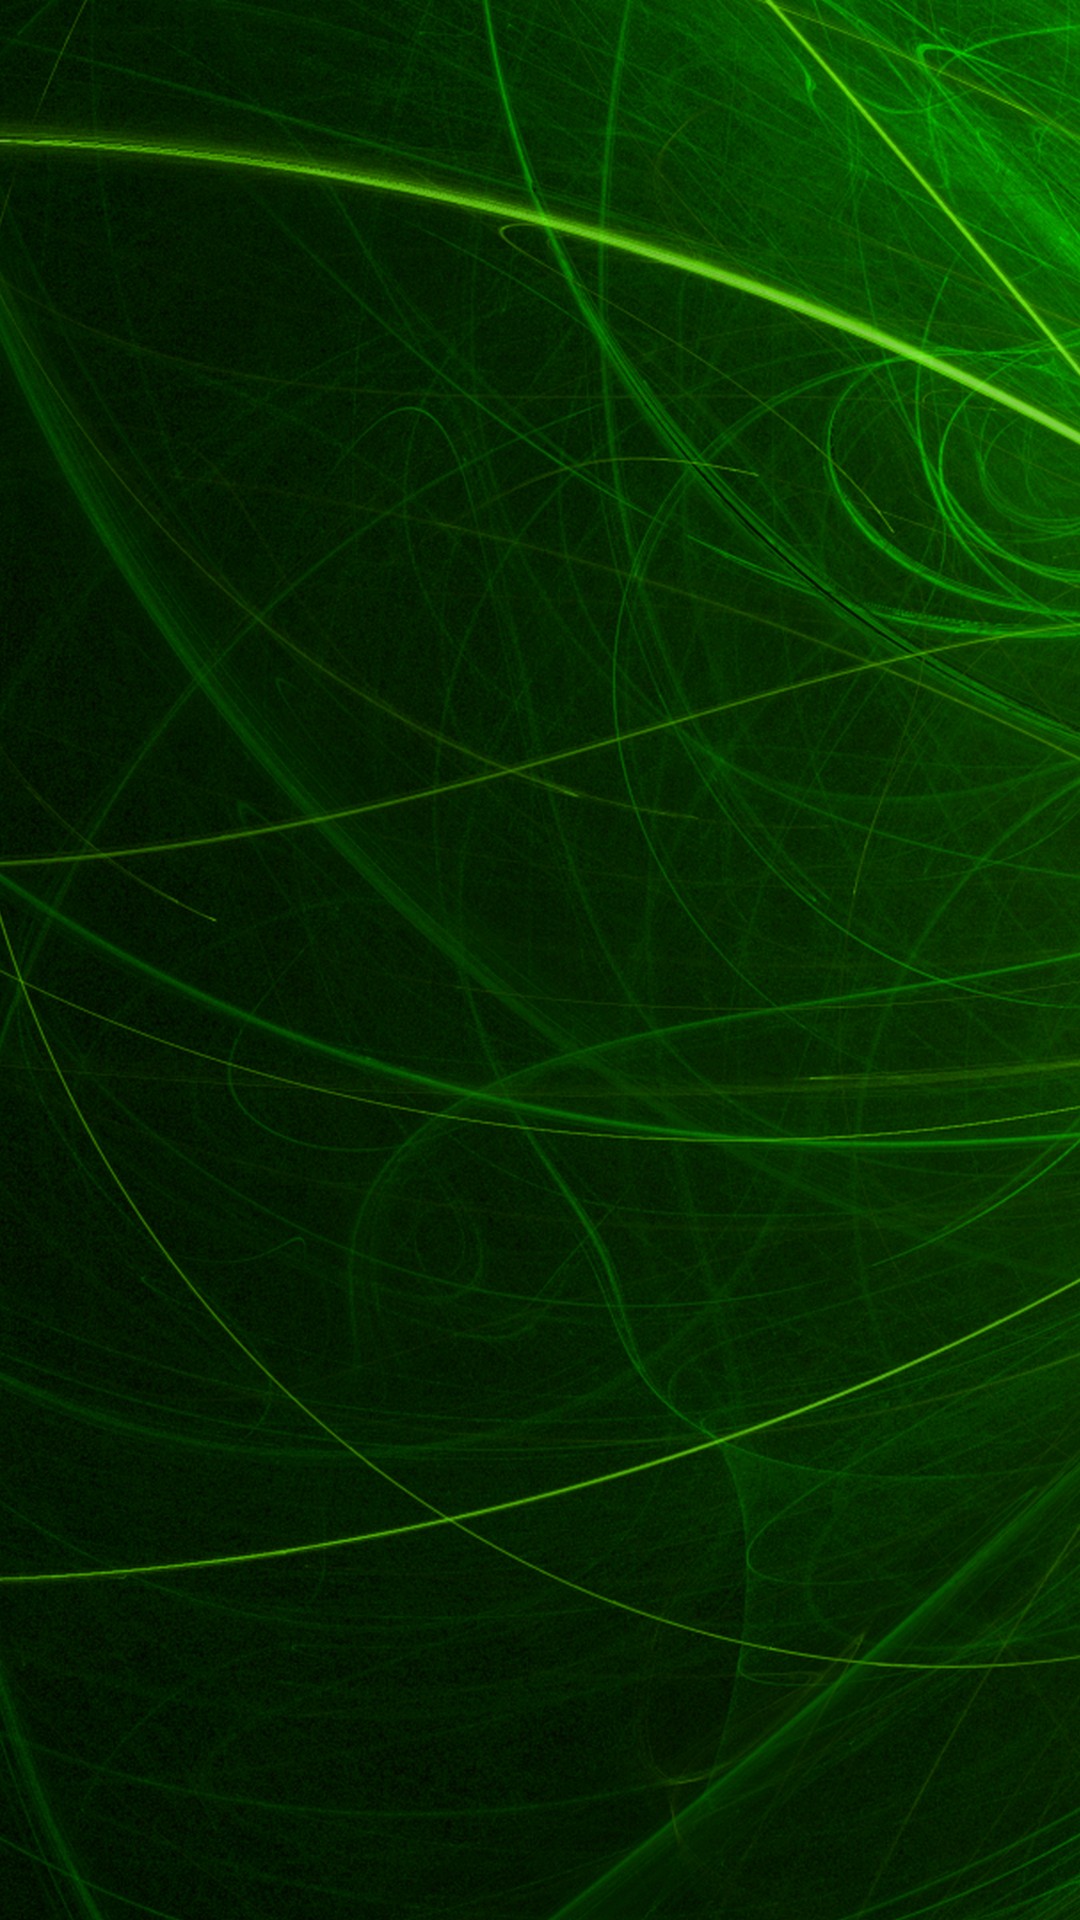 Black and Green Android Wallpaper with resolution 1080X1920 pixel. You can make this wallpaper for your Android backgrounds, Tablet, Smartphones Screensavers and Mobile Phone Lock Screen